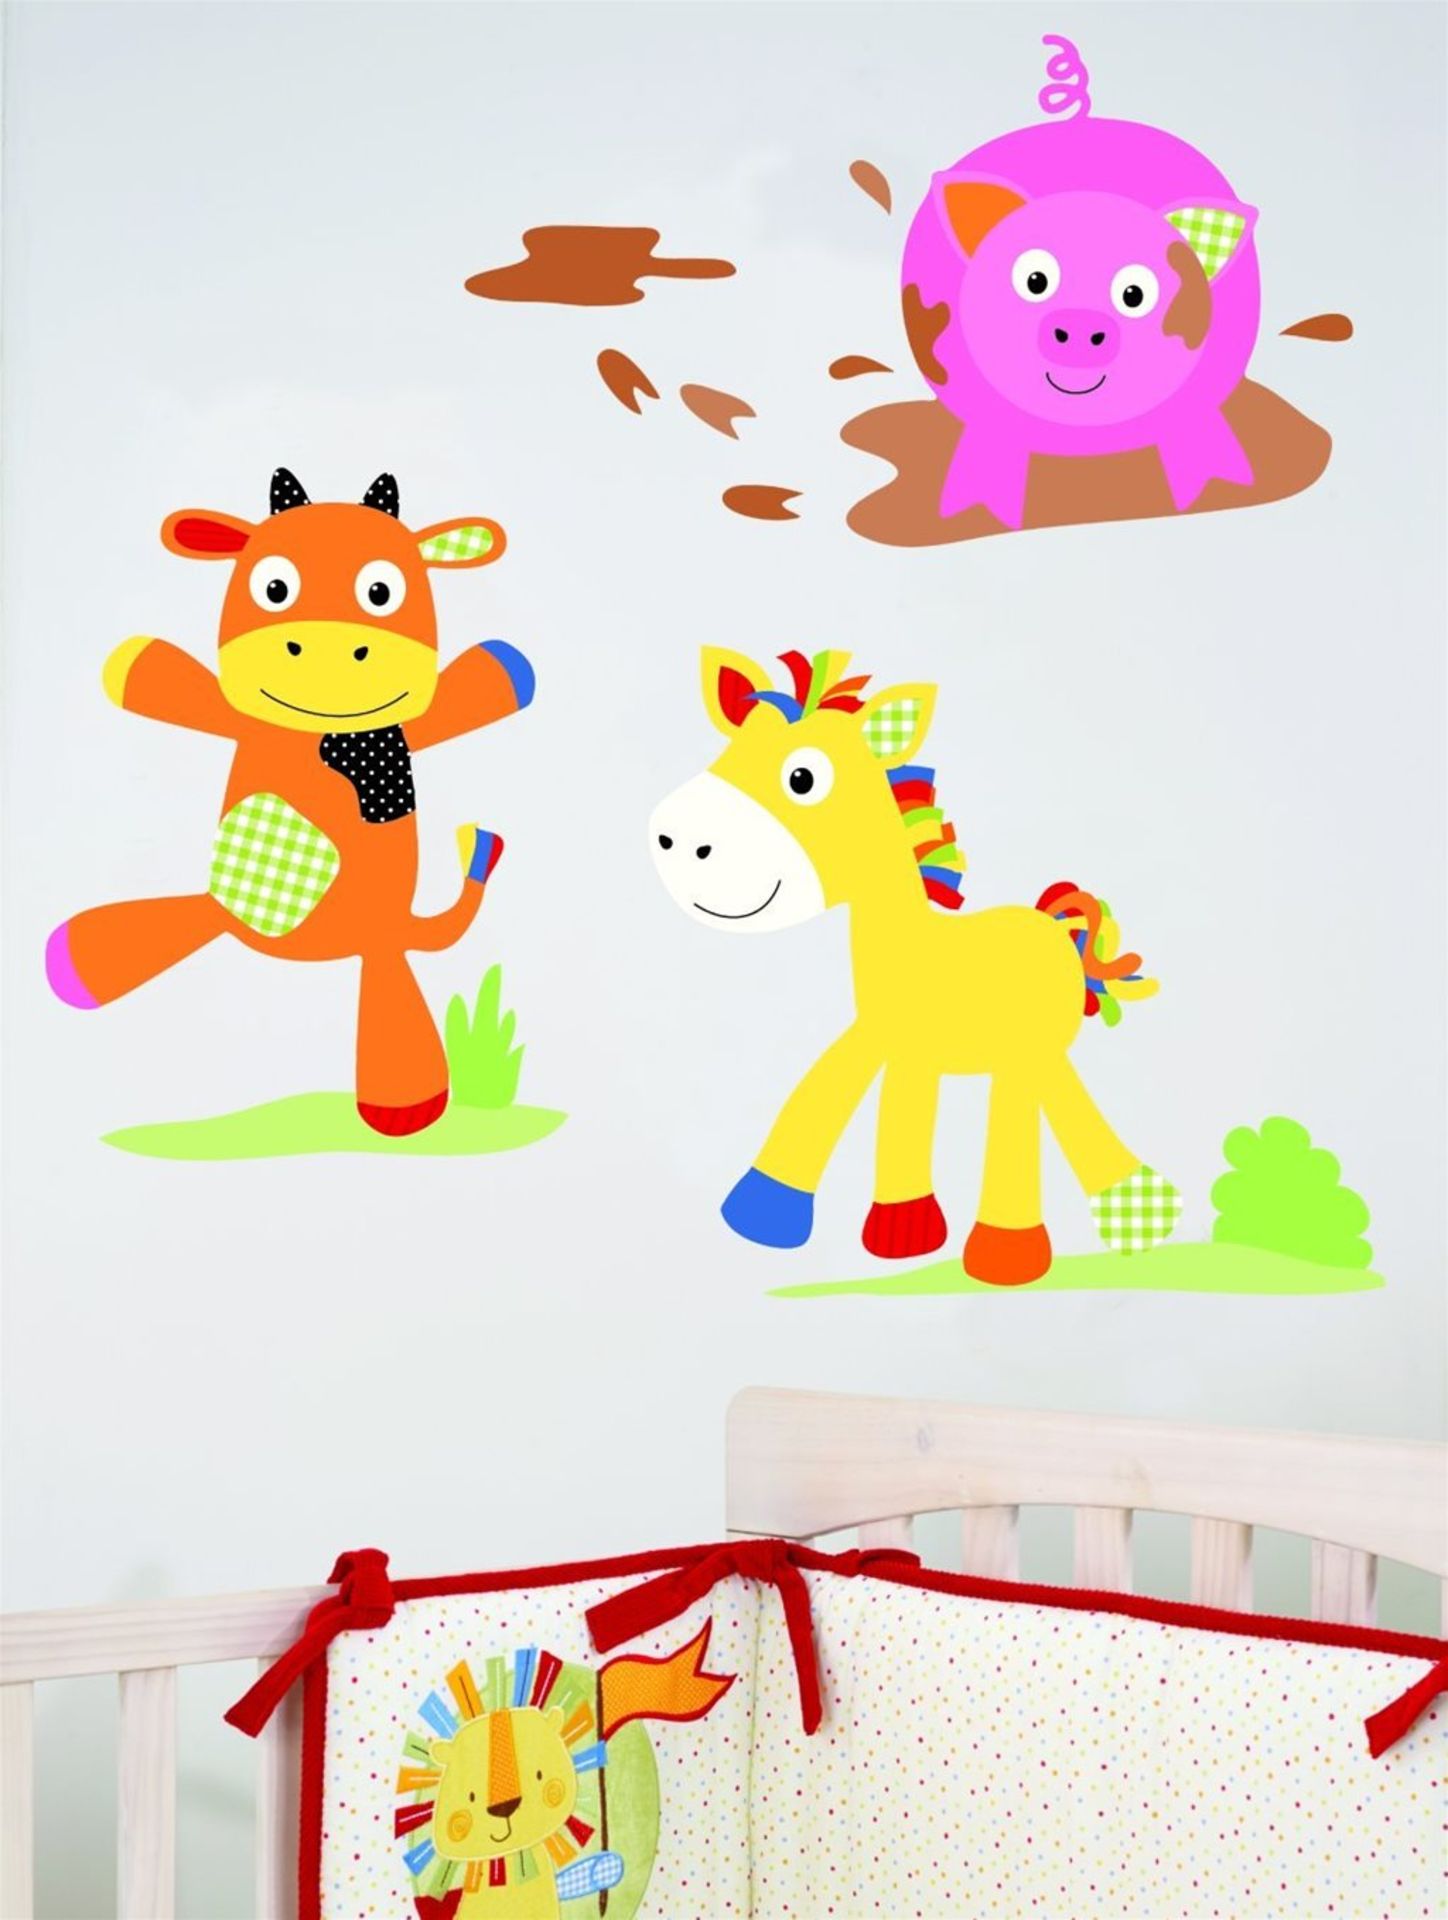 50 sets Funberry Farm Nursery MakeOver Kit (Over 70 Wall Stickers to Decorate the Whole Bedroom) - Image 2 of 3